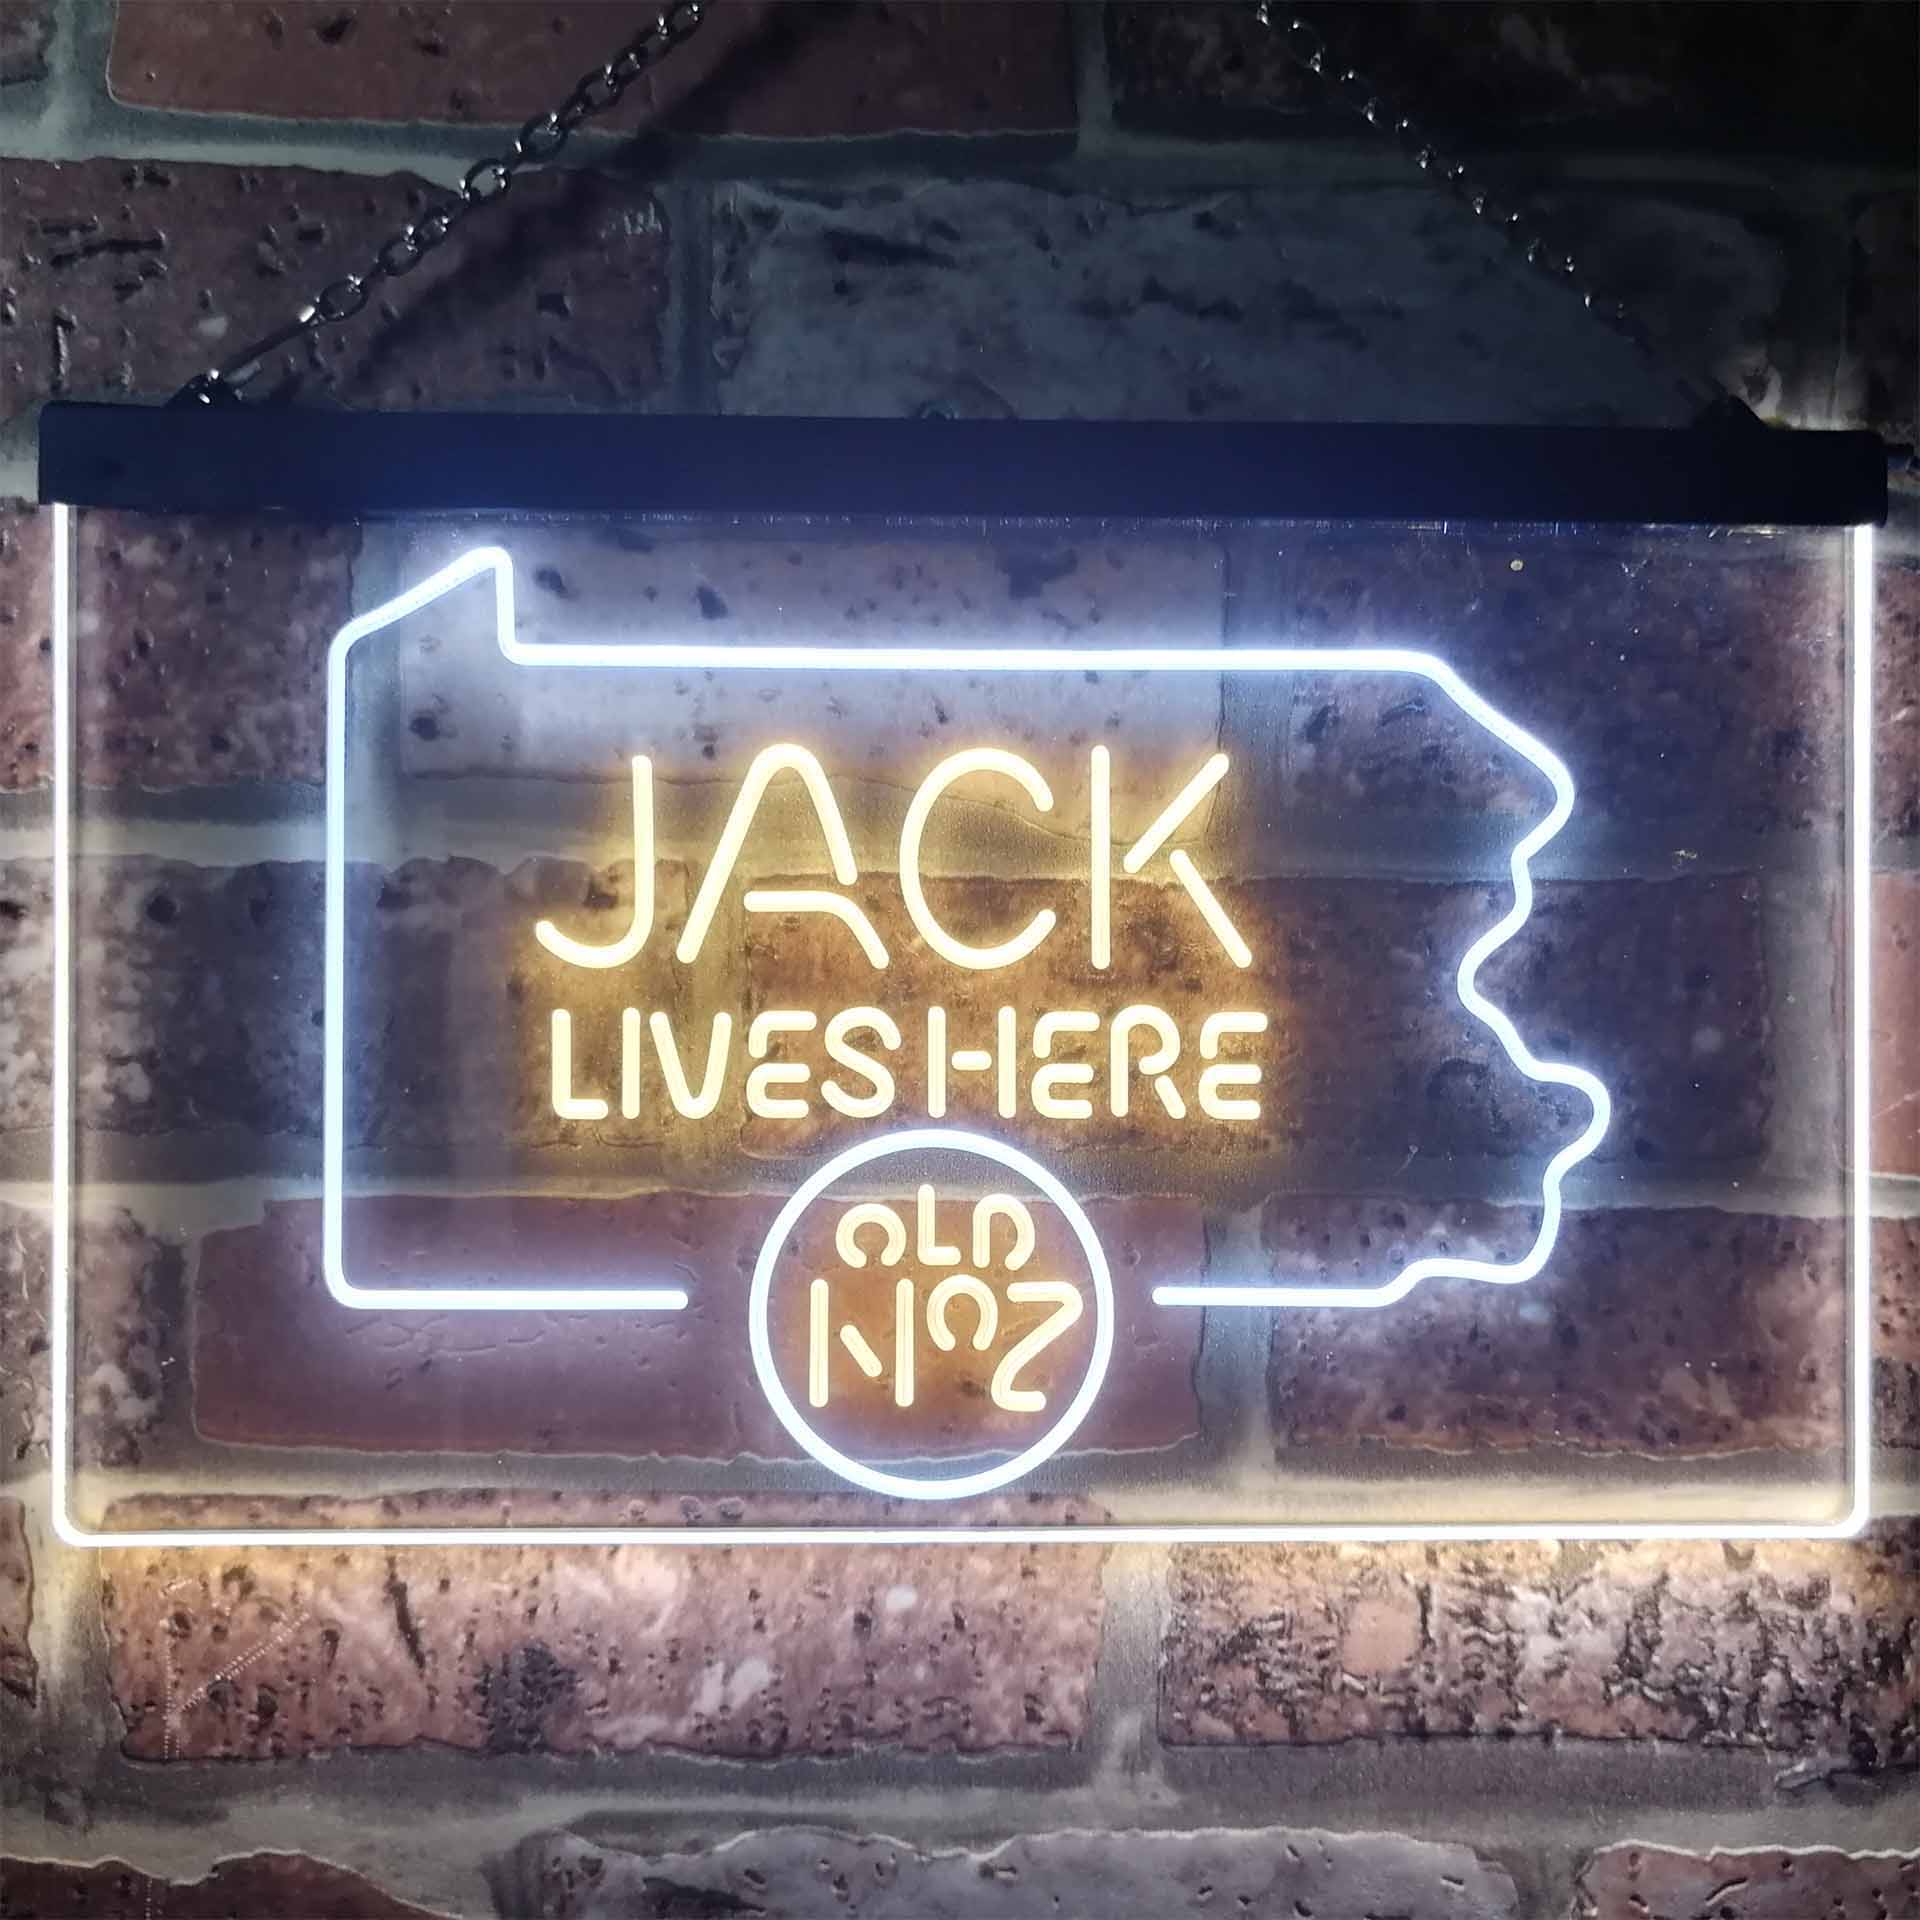 Pennsylvania Jack Lives Here Dual Color LED Neon Sign ProLedSign